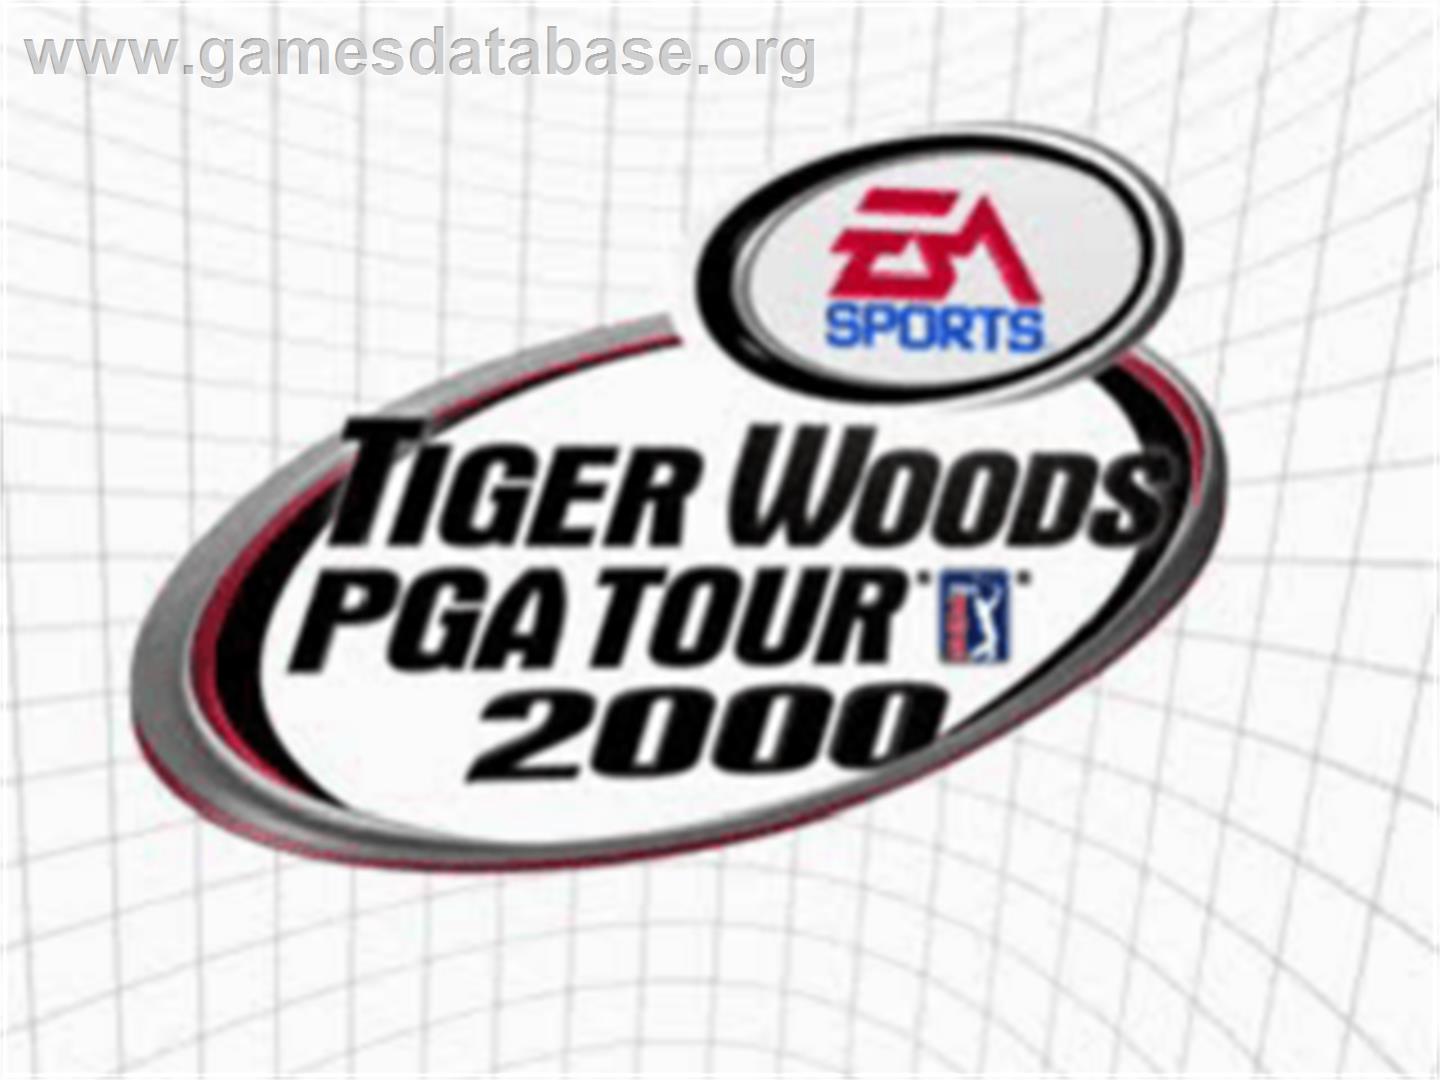 Tiger Woods PGA Tour 2000 - Sony Playstation - Artwork - Title Screen